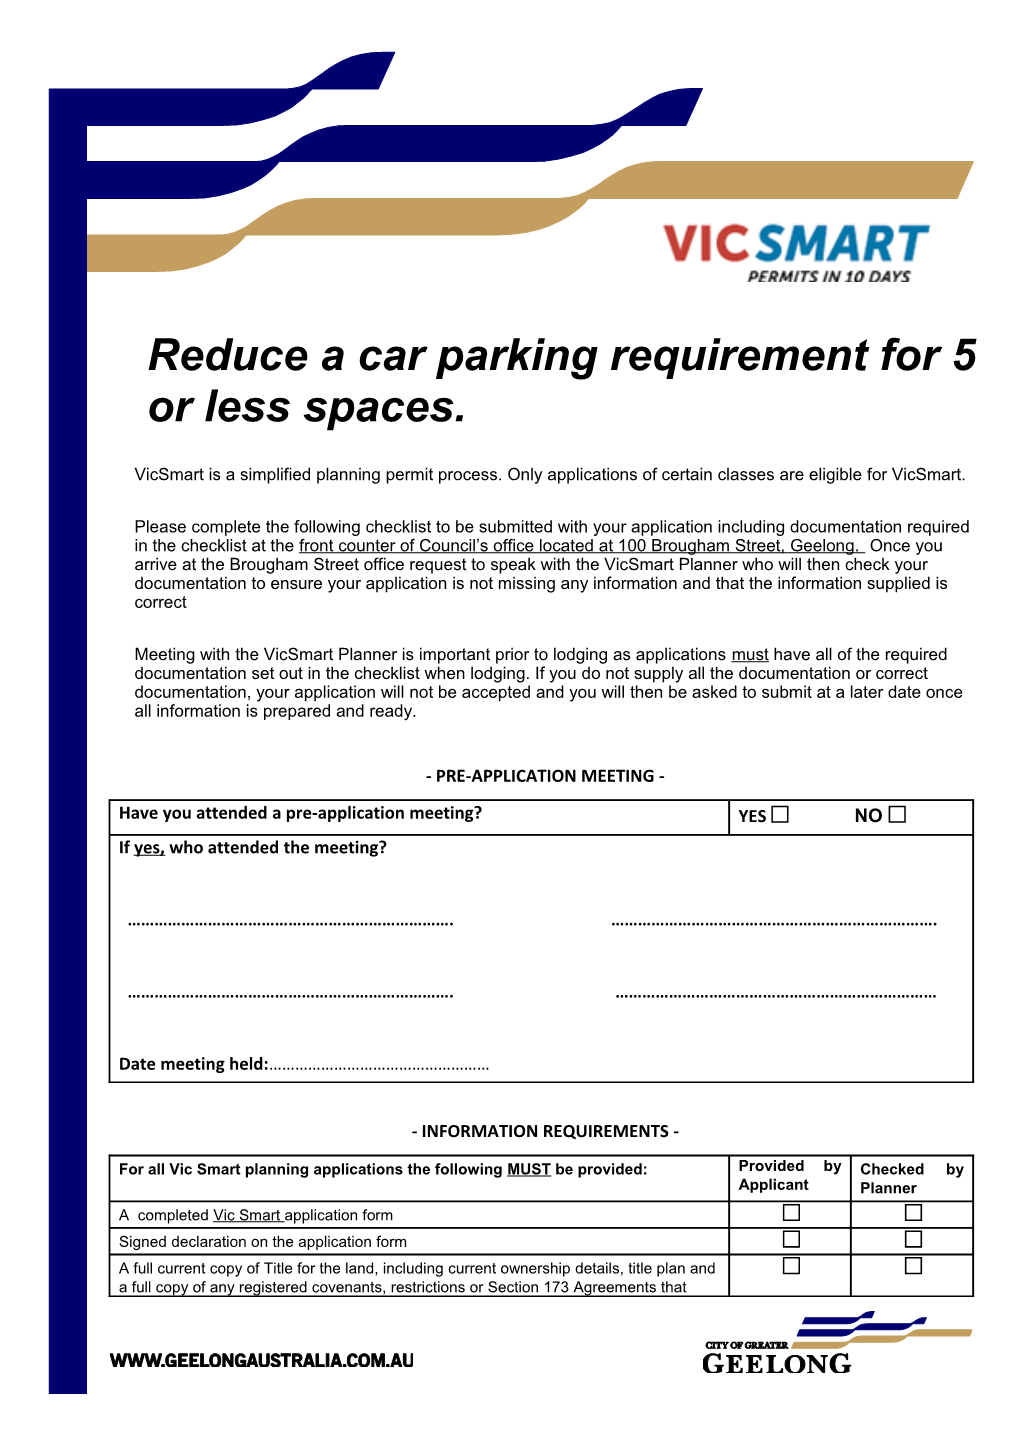 Reduce a Car Parking Requirement for 5 Or Less Spaces